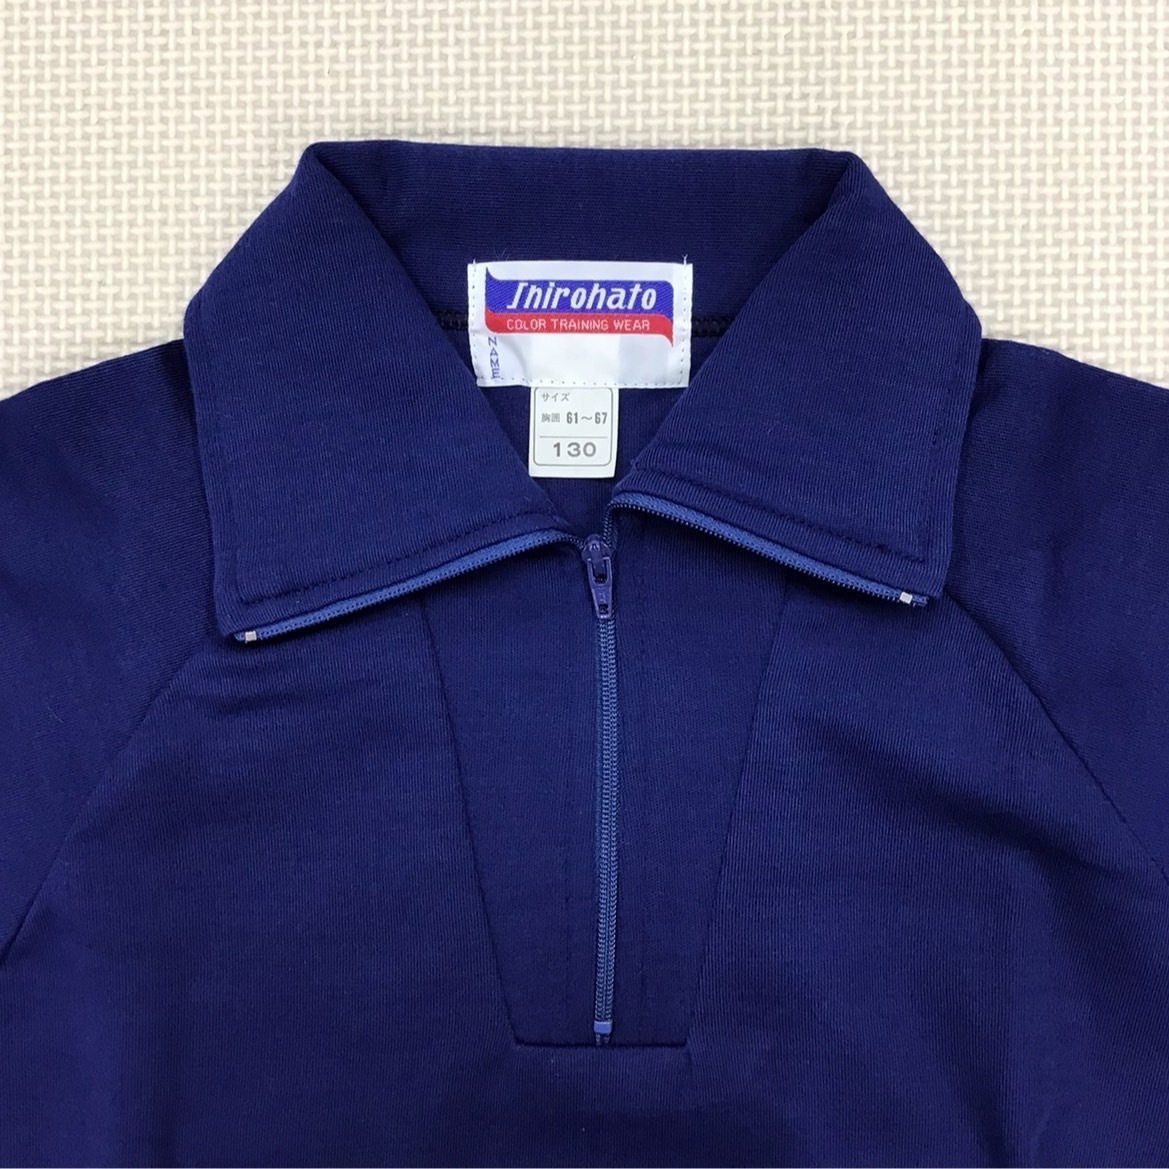 (M)308 new goods [Shirohato] white is to training shirt size 130 / rayon / plain / long sleeve / navy blue / collar fastener / gym uniform / children's / elementary school student / made in Japan 